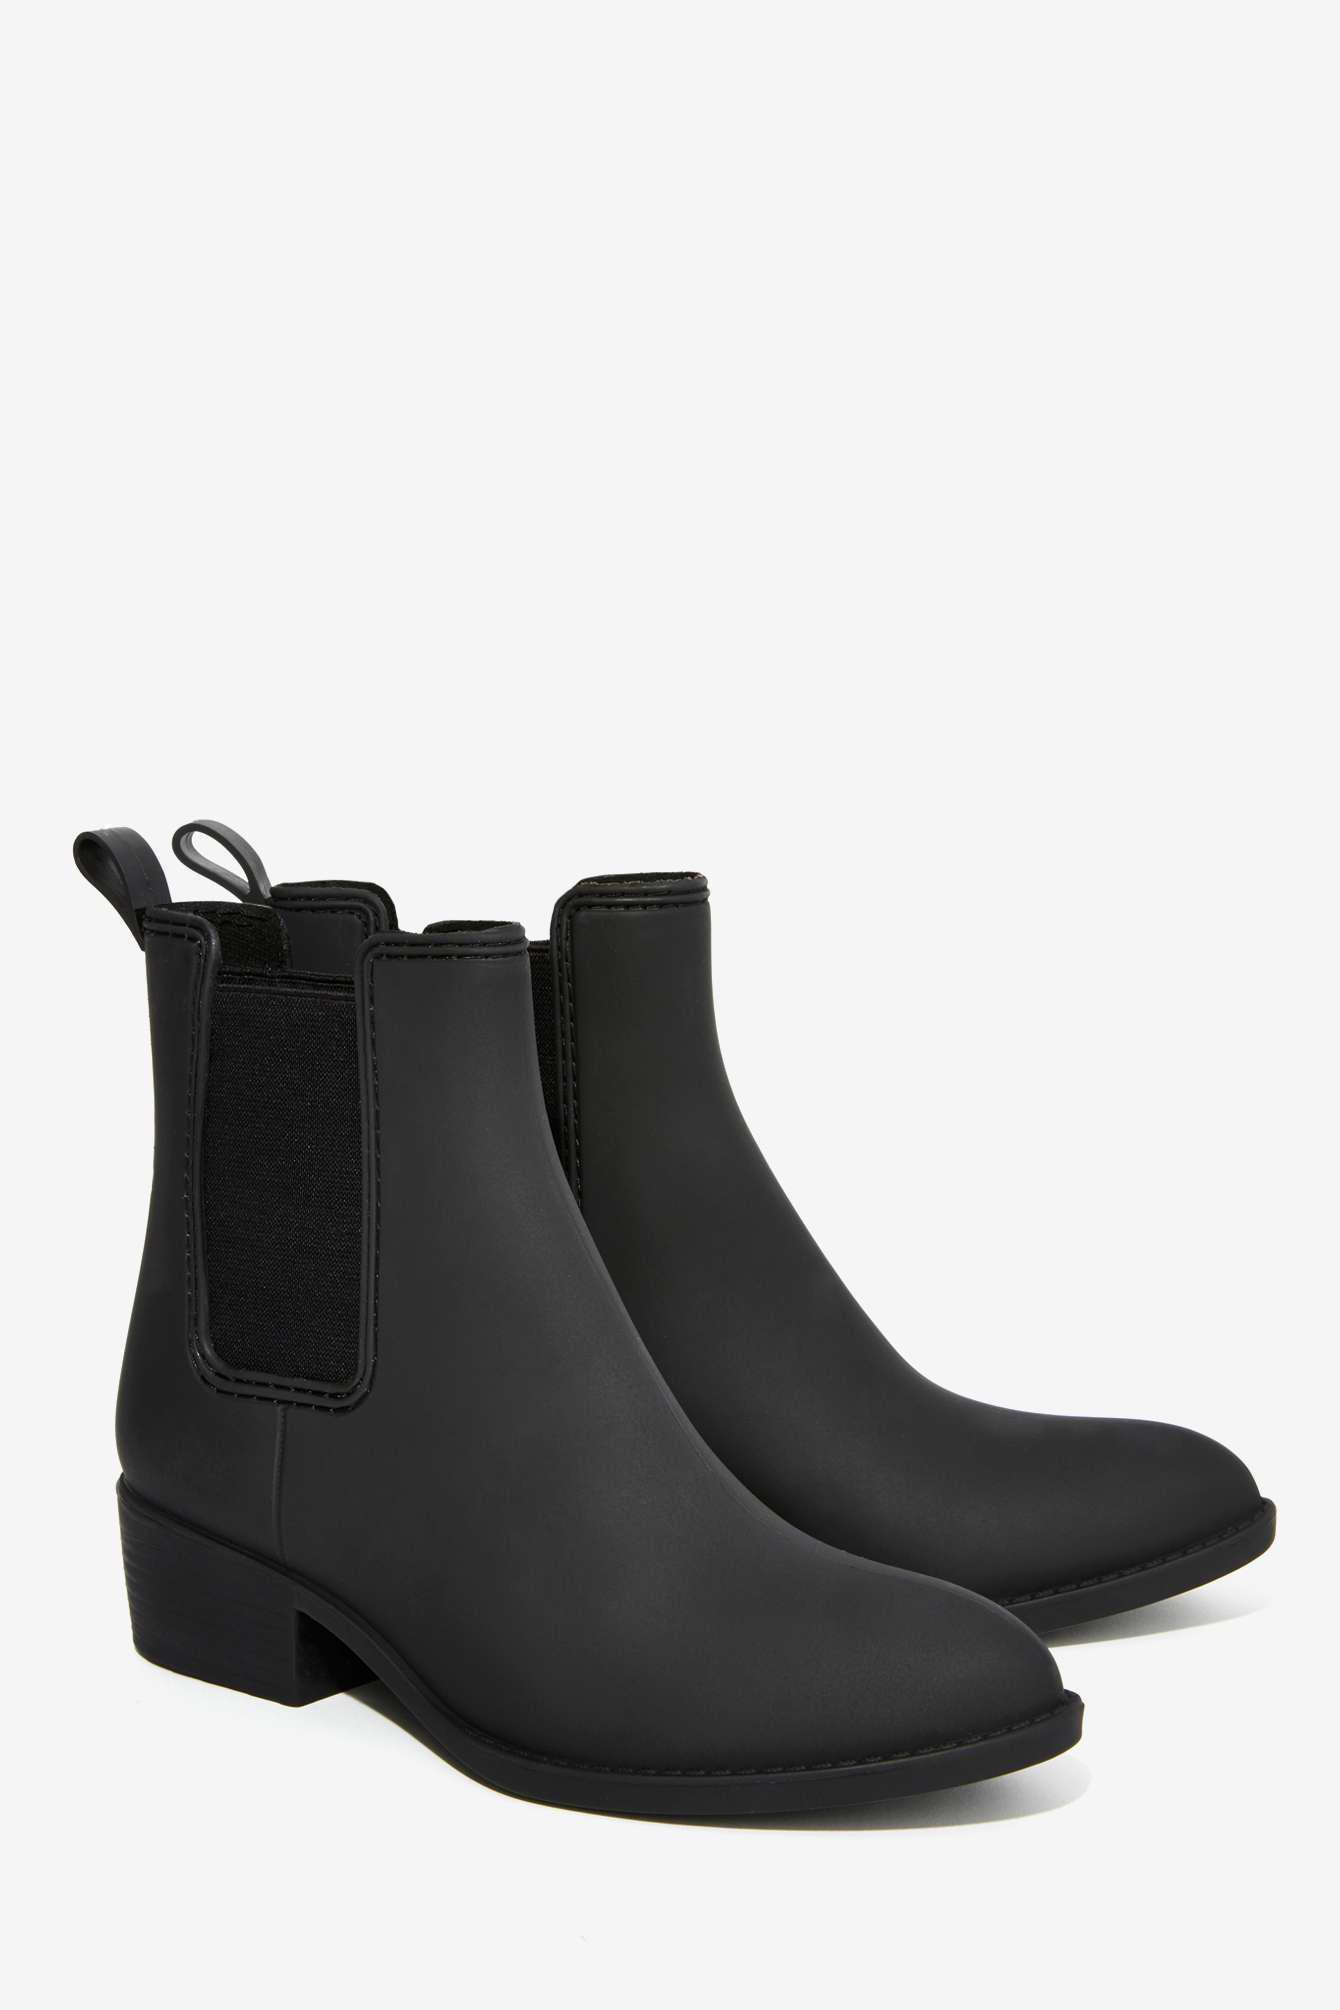 Friday Faves: Rain Boots - Perfete